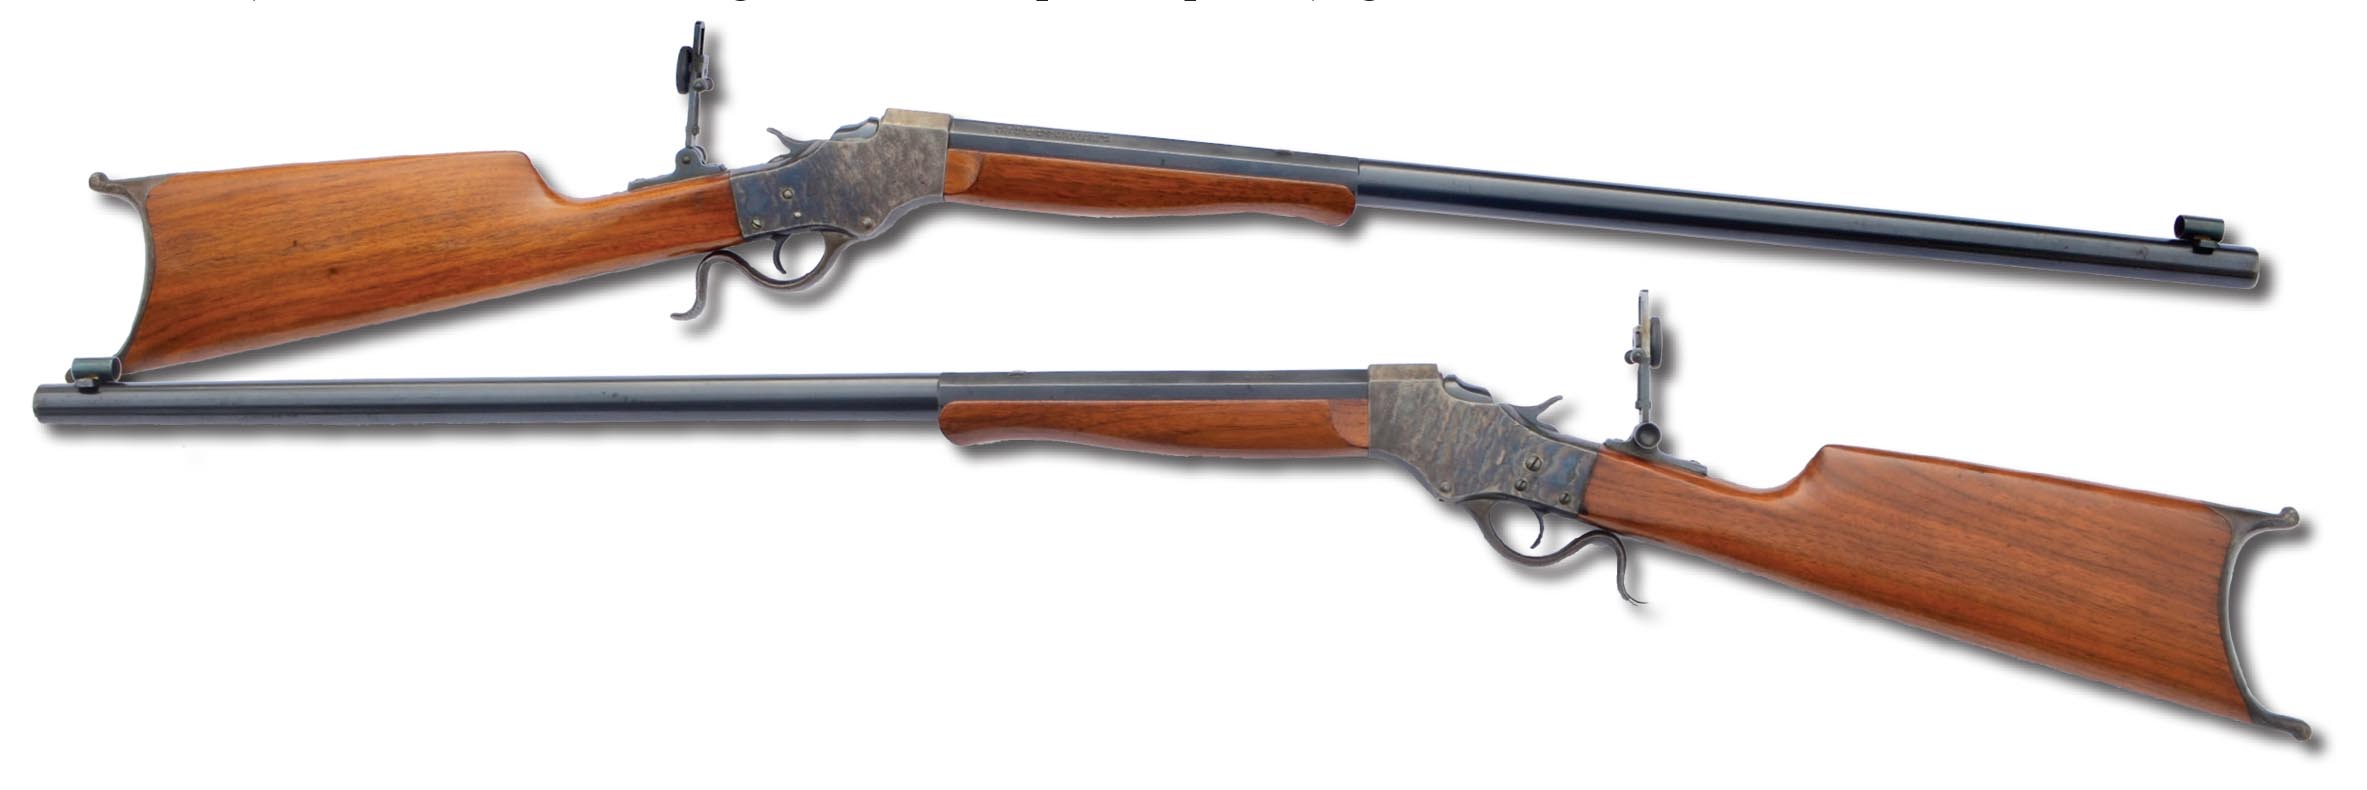 The Stevens Model 45 (No. 44½ action) with 28-inch barrel was built between 1903 and 1916. This rifle is almost a miracle in that it not only is in near-perfect condition, but it survived the barbarous 1930s when such rifles were being cannibalized for their actions.